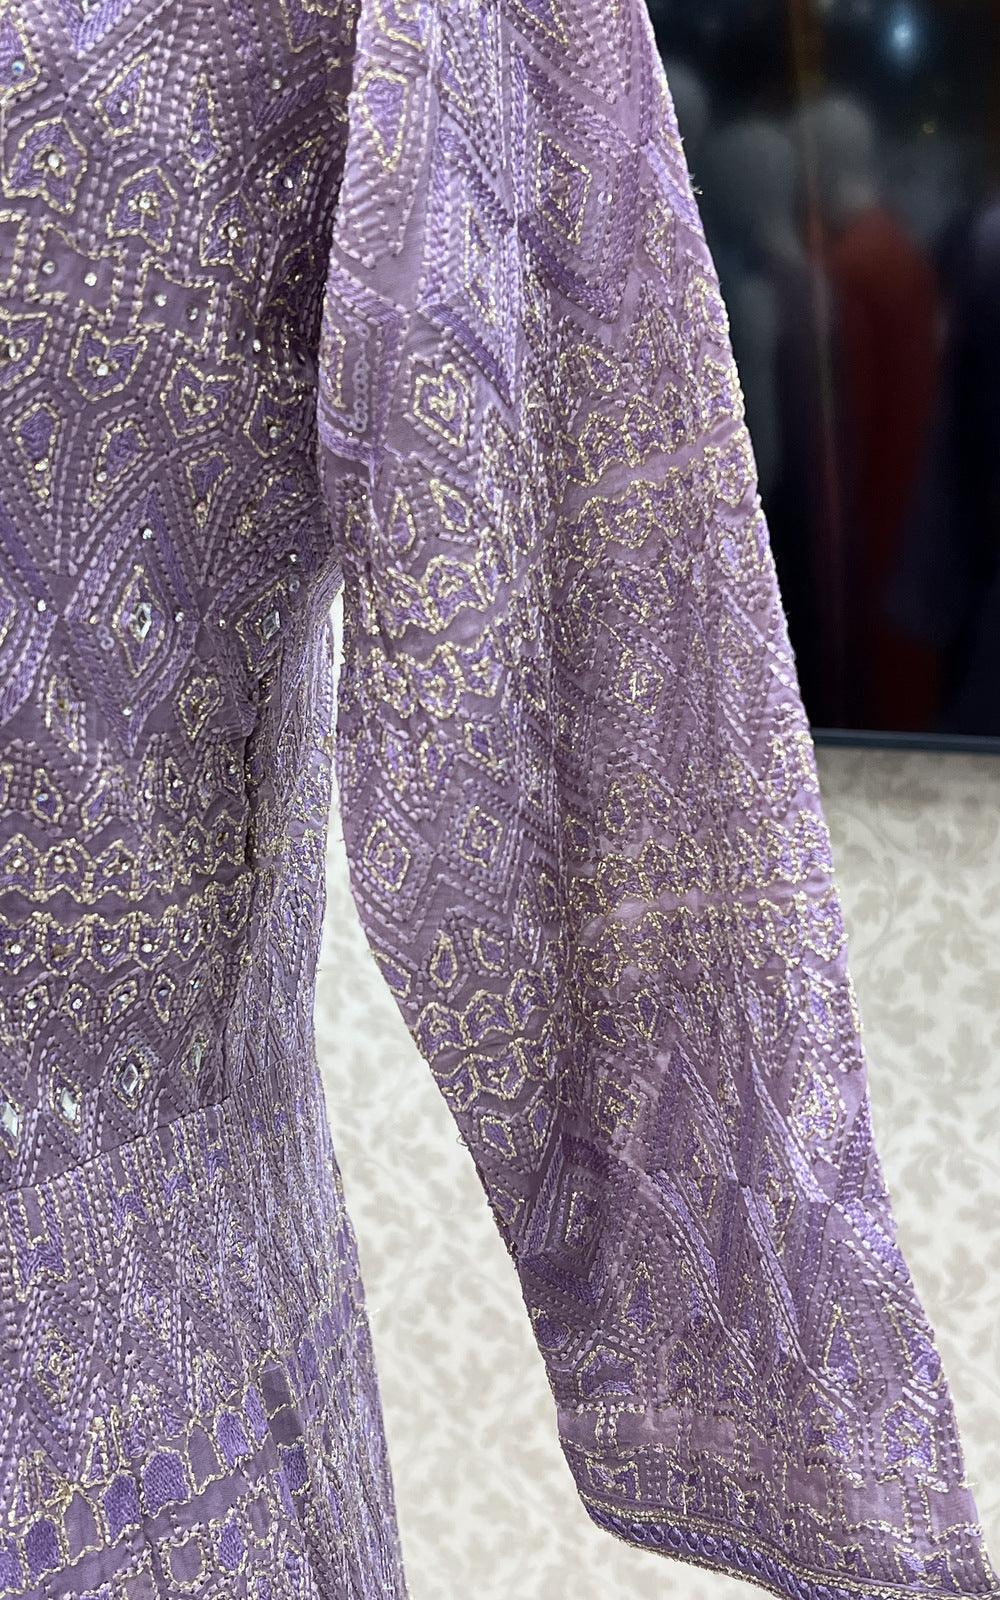 Light Lavender Sequins and Thread work Long Overcoat Styled Cowl Lehenga with Crop Top - Seasons Chennai